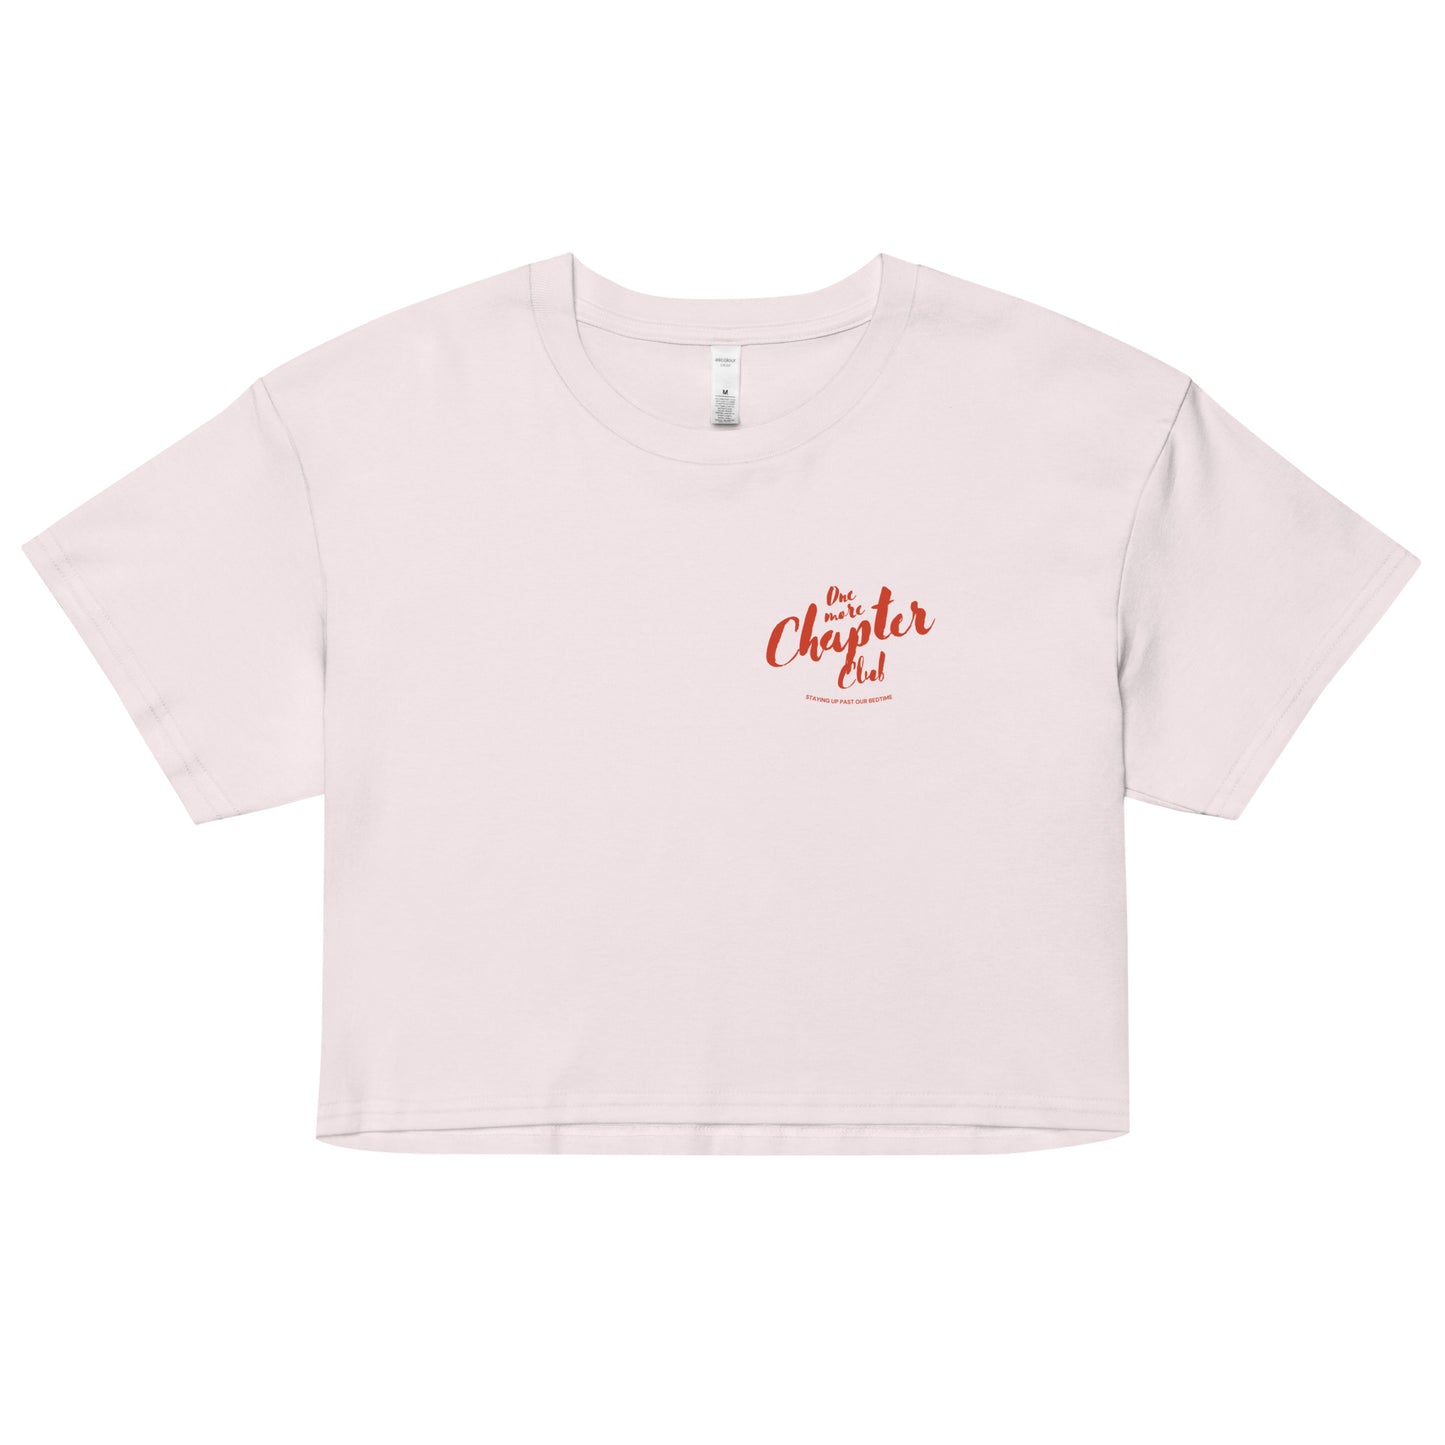 One More Chapter Club | Women’s crop top